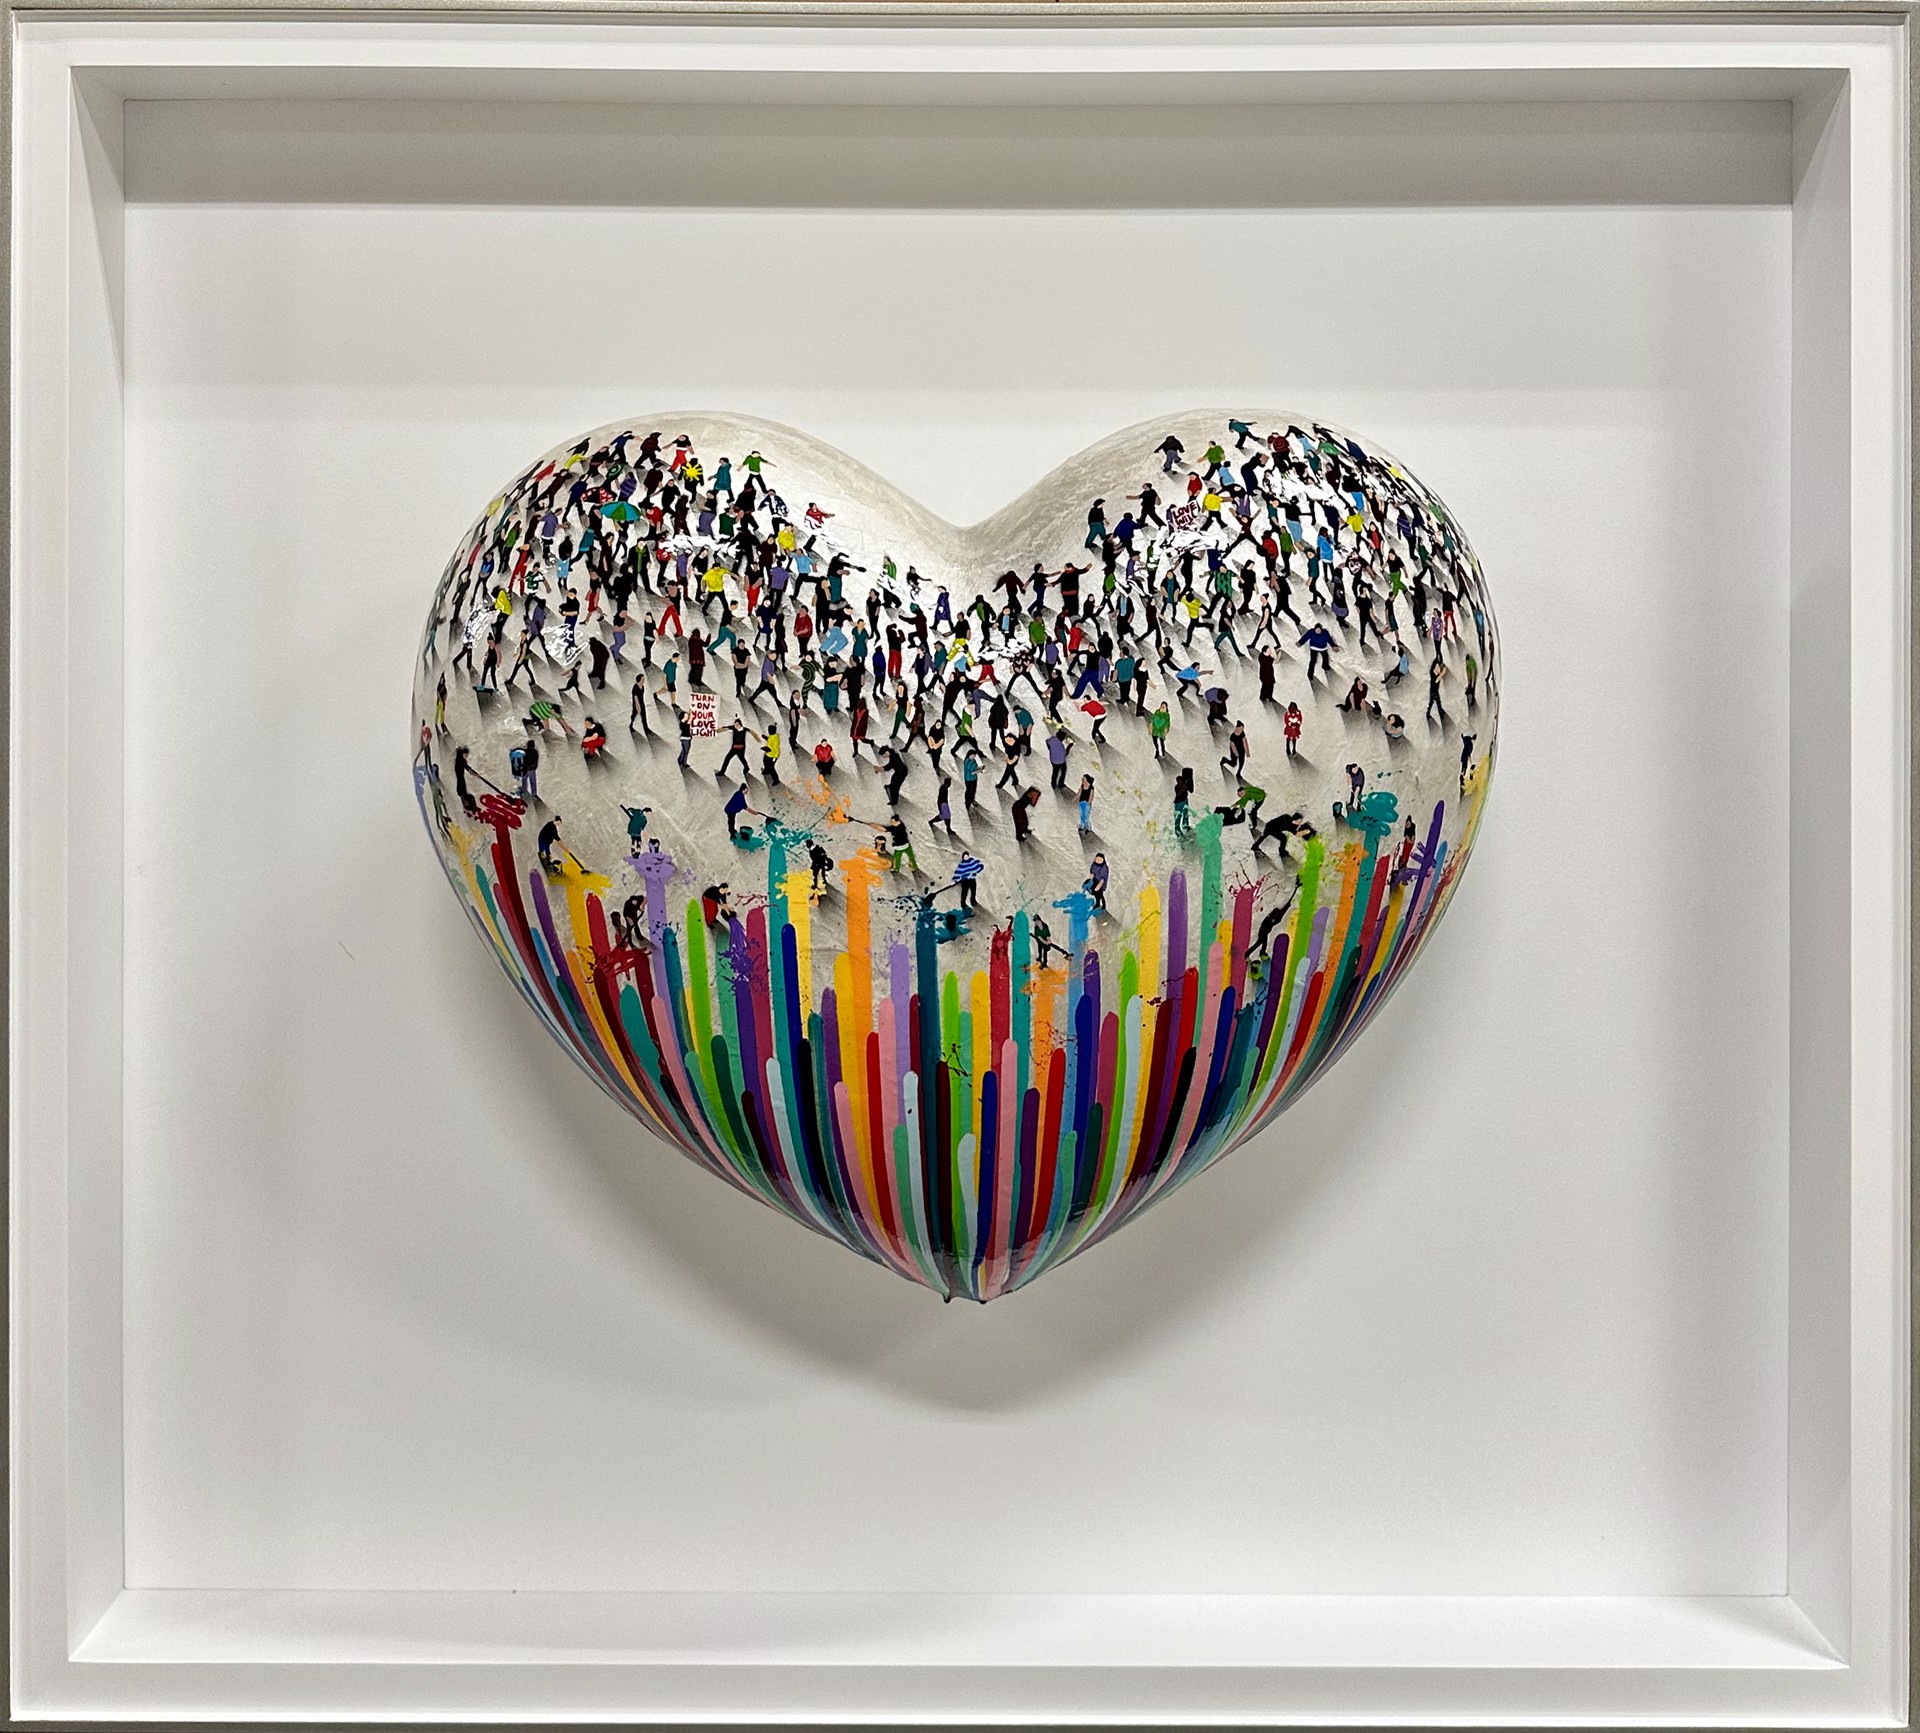 Soul Affection - Pearl with Colorful Drips by Craig Alan, Populus